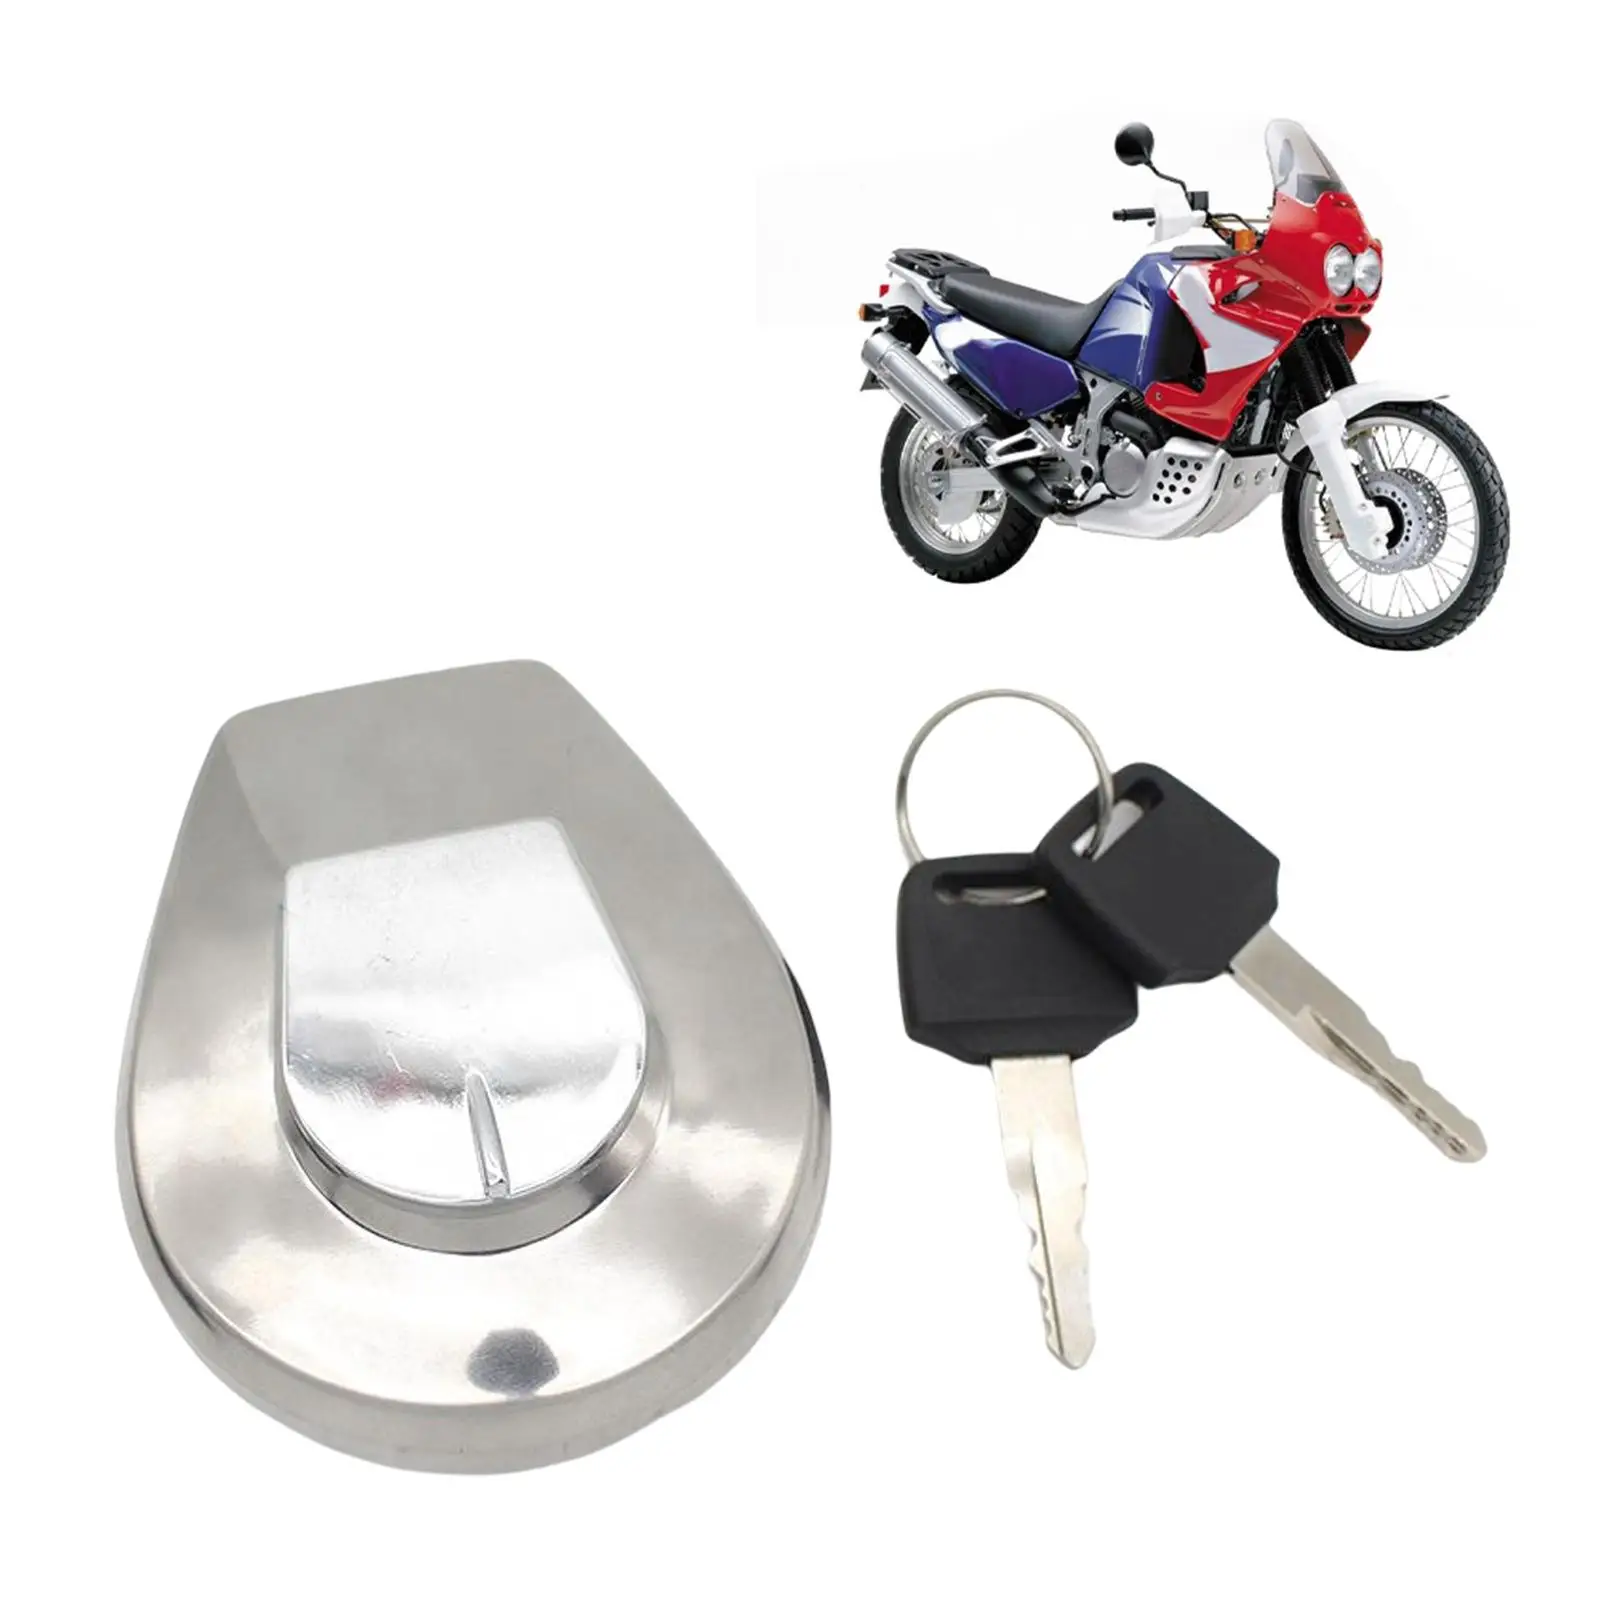 Motorcycle Oil Fuel Tank Gas Cap Cover with 2 Keys for  Vf750C CB550SC GL1500C VT700C CX650C